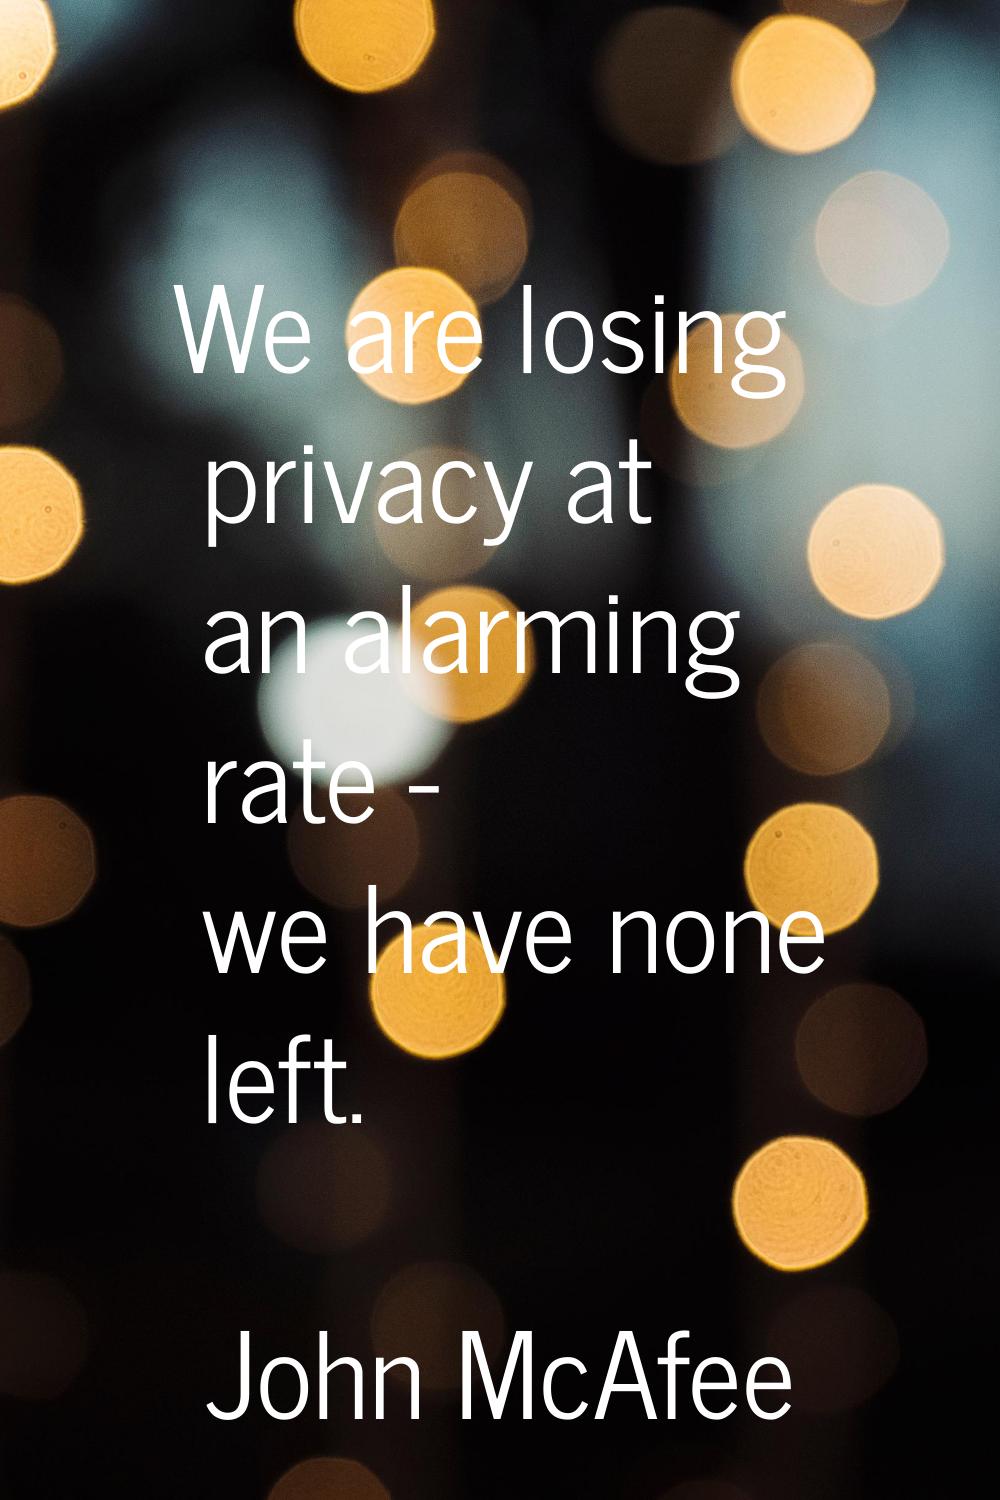 We are losing privacy at an alarming rate - we have none left.